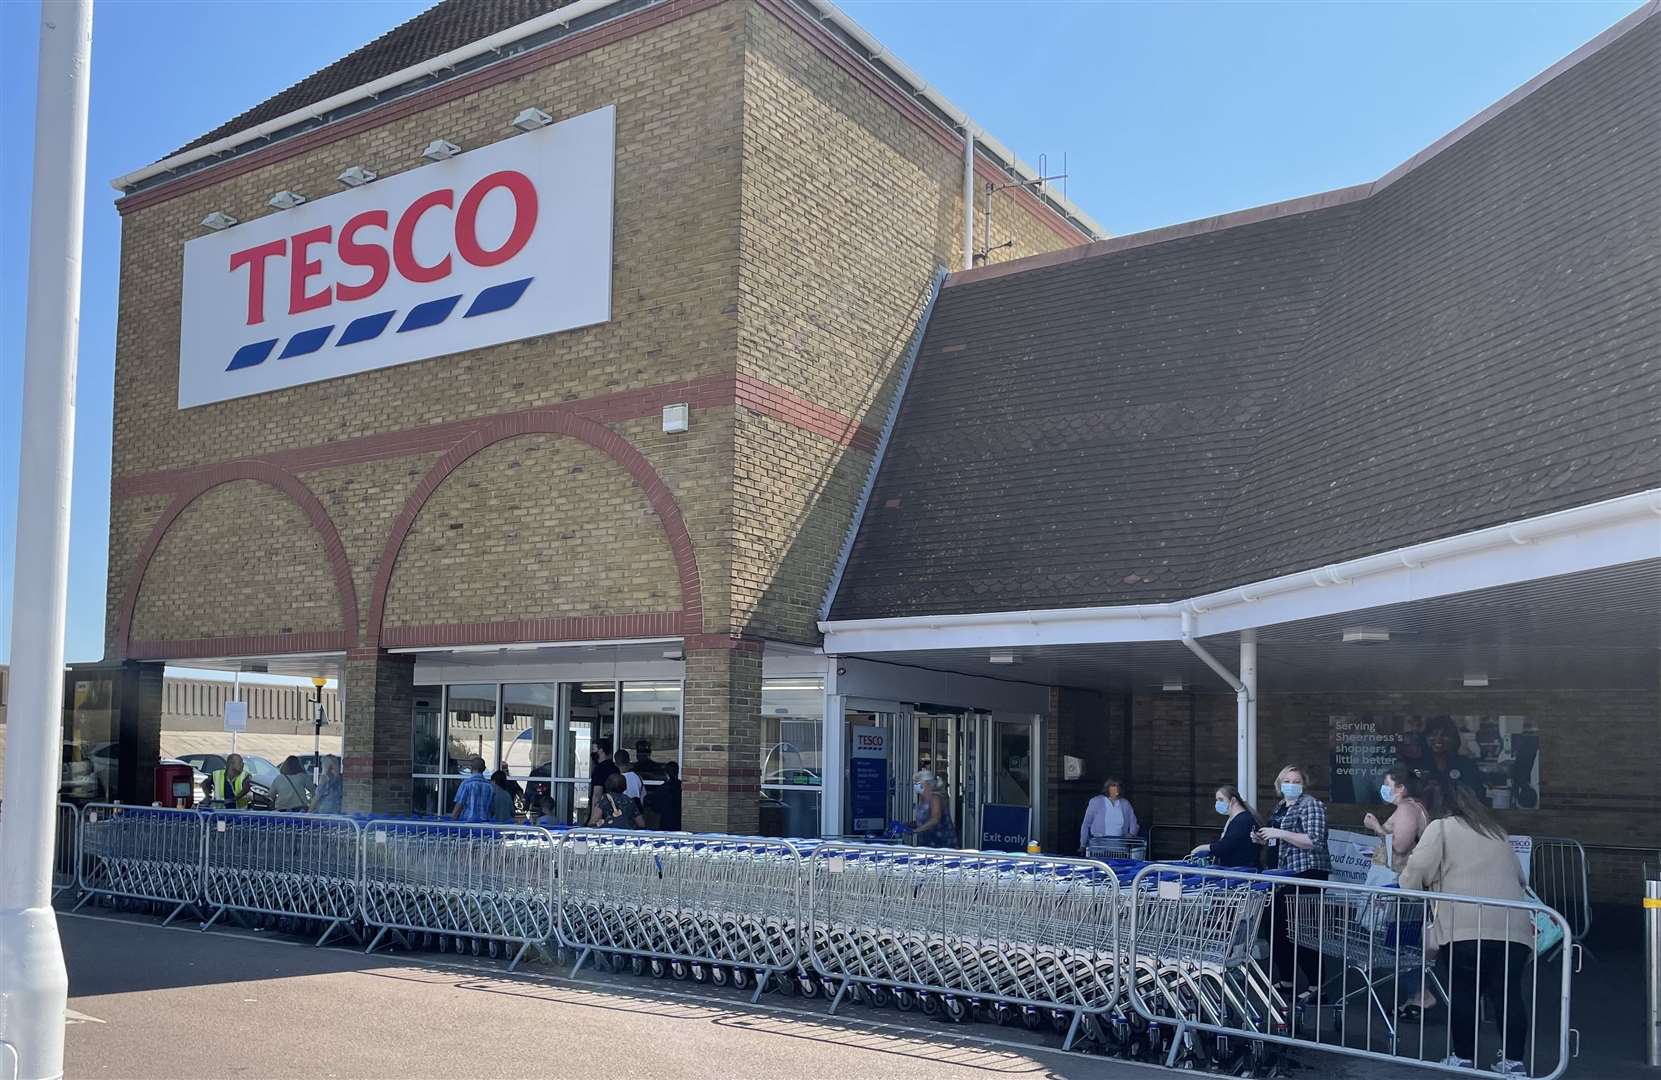 Shoppers at Tesco in Sheerness seemed to mostly be wearing masks